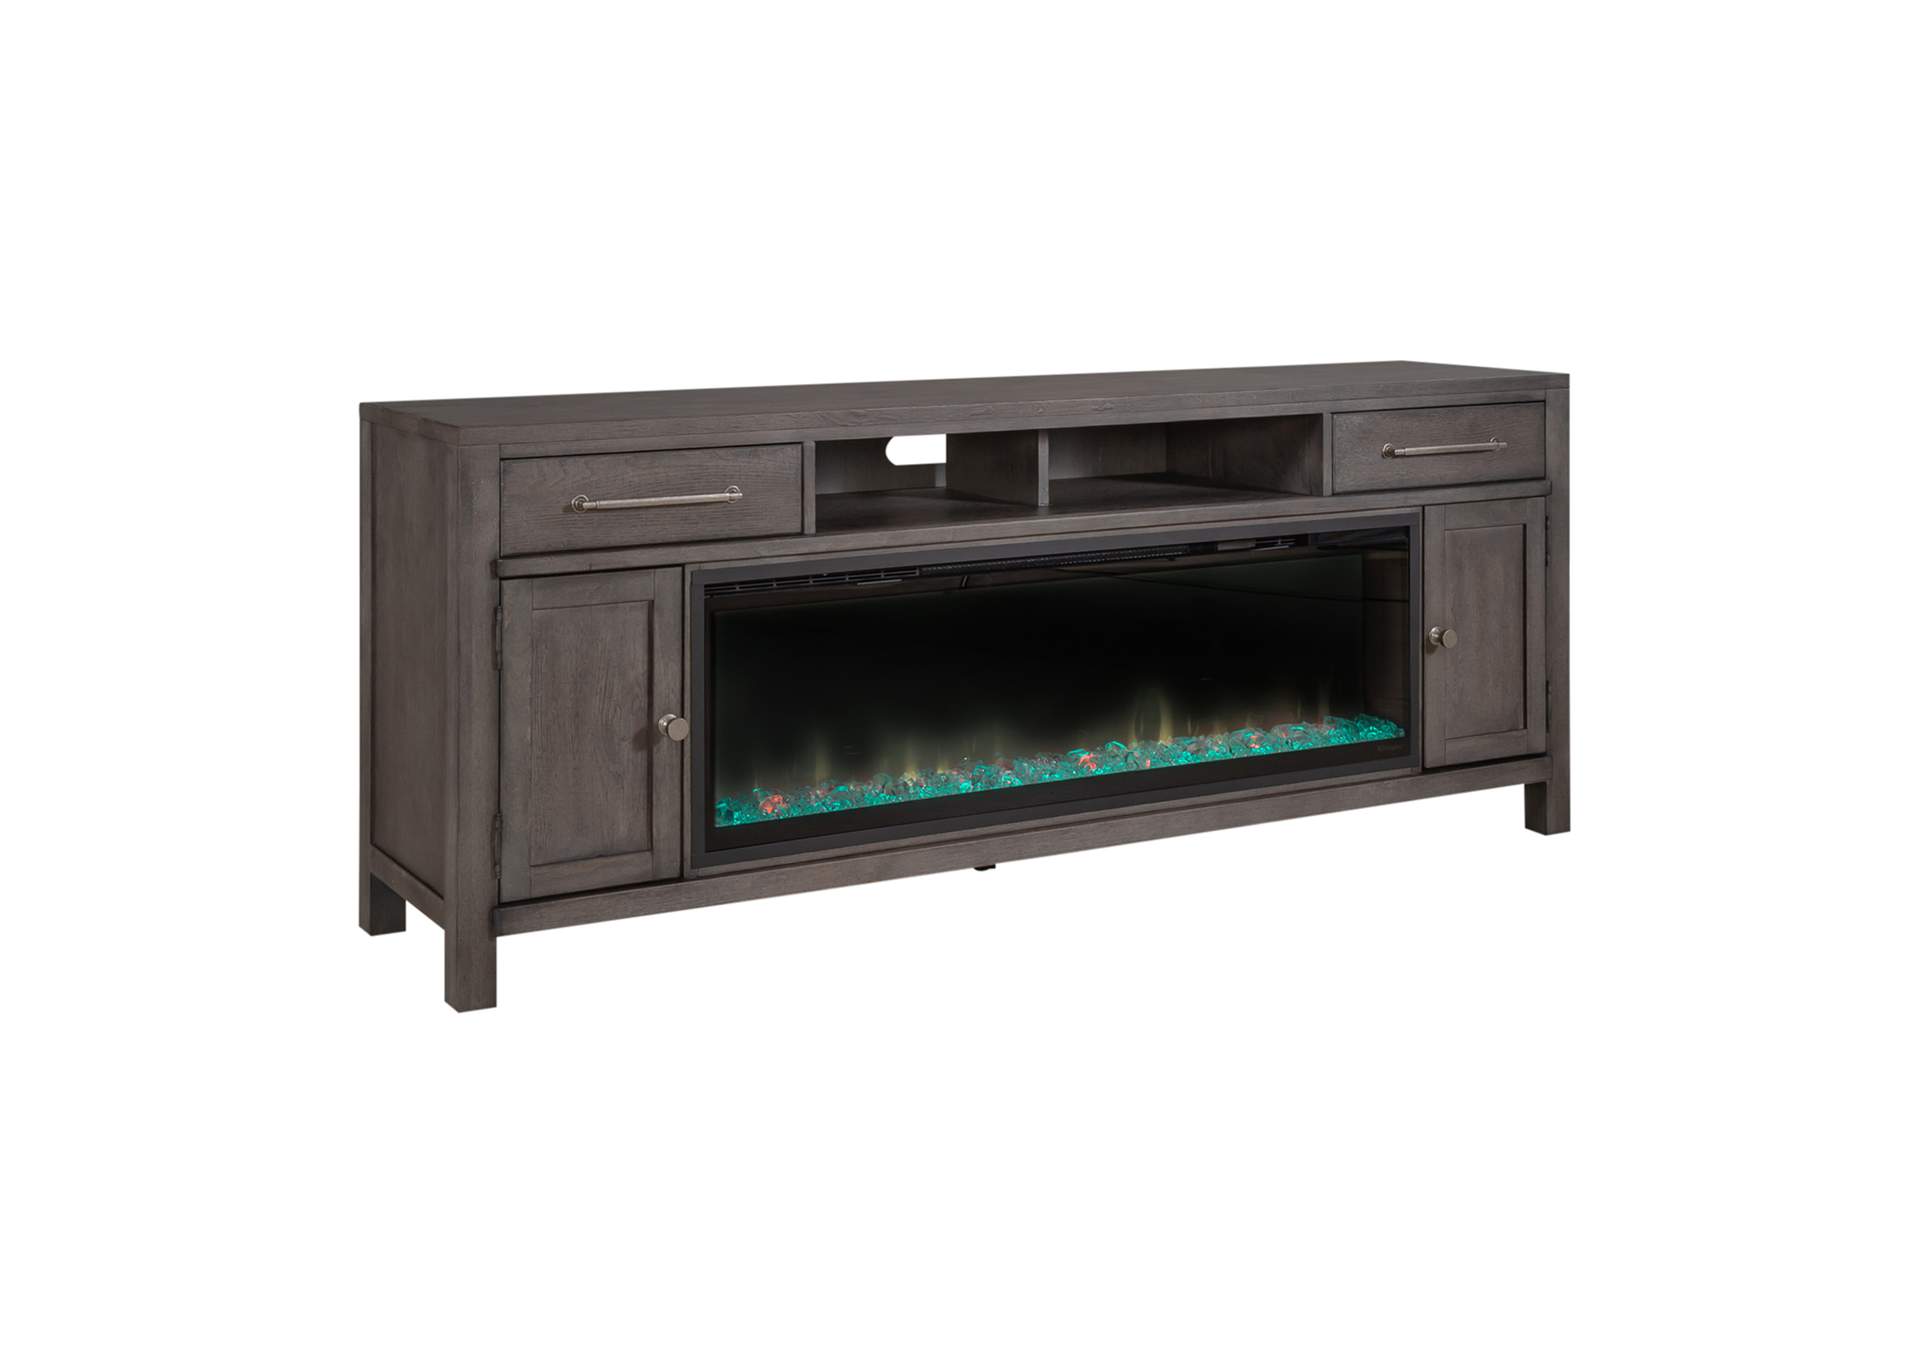 Fireplace TV Consoles 78 Inch Fireplace TV Console,Liberty